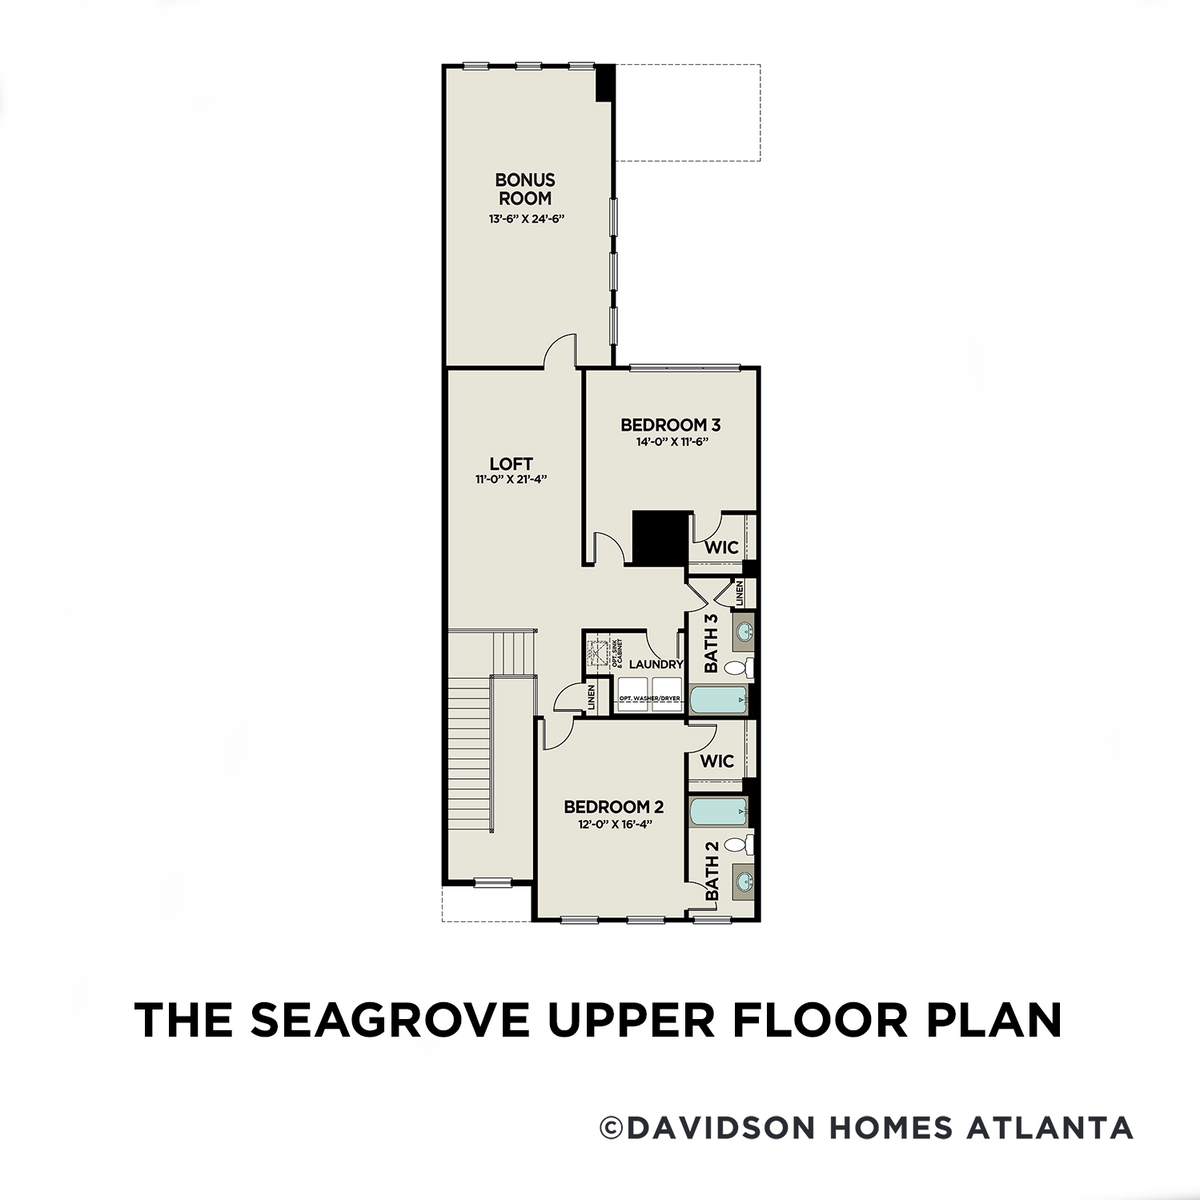 2 - The Seagrove B floor plan layout for 692 Stickley Oak Way in Davidson Homes' The Village at Towne Lake community.